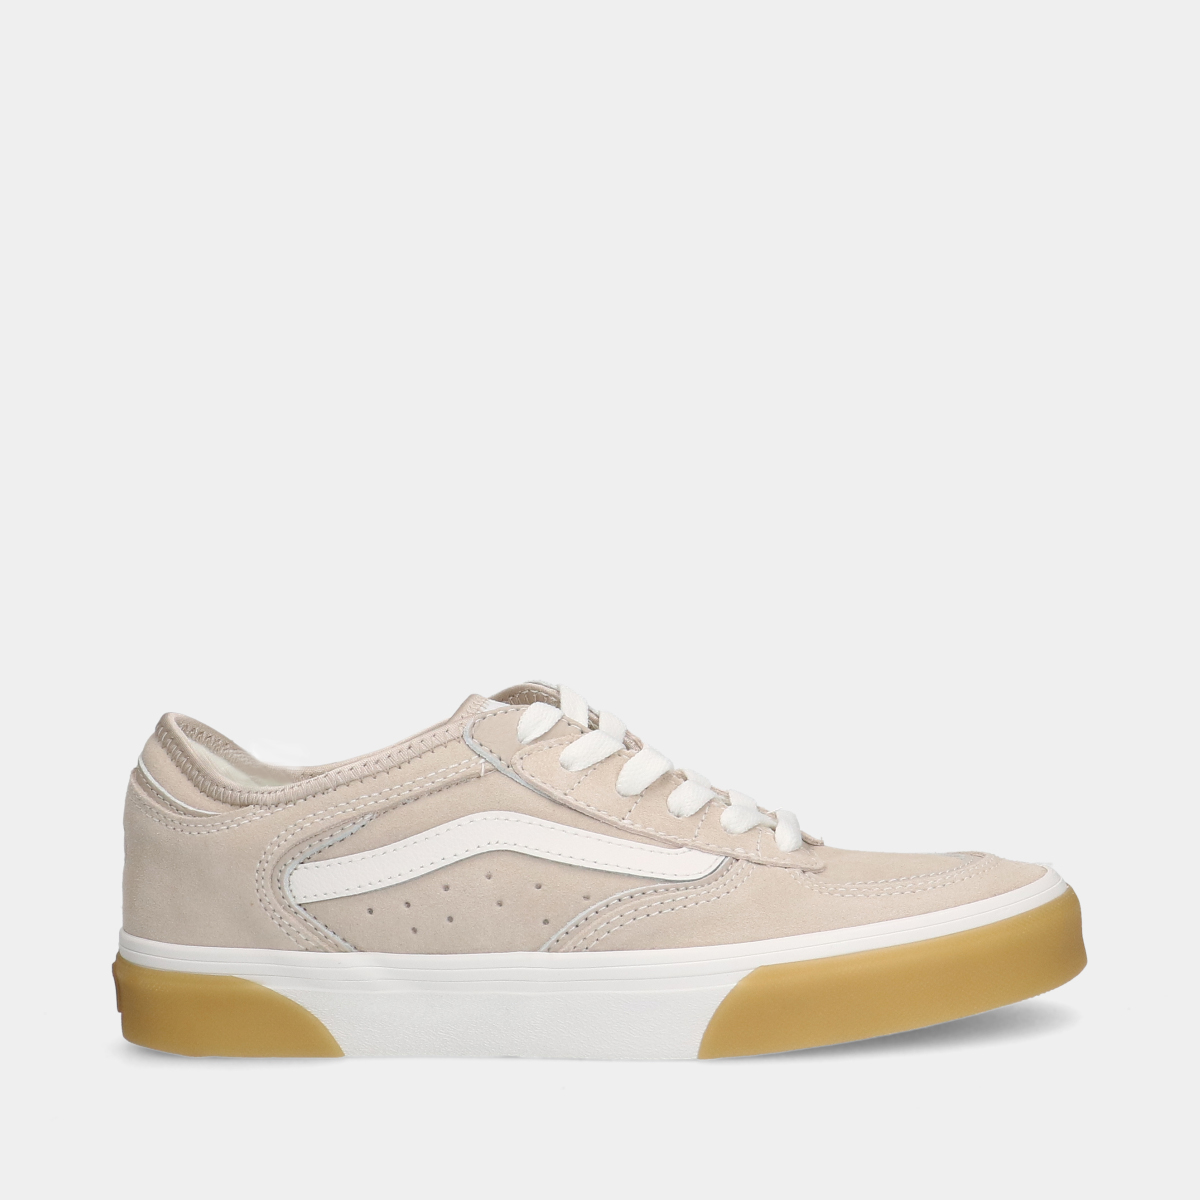 Sneakers Vans Rowley Classic Muted clay gum